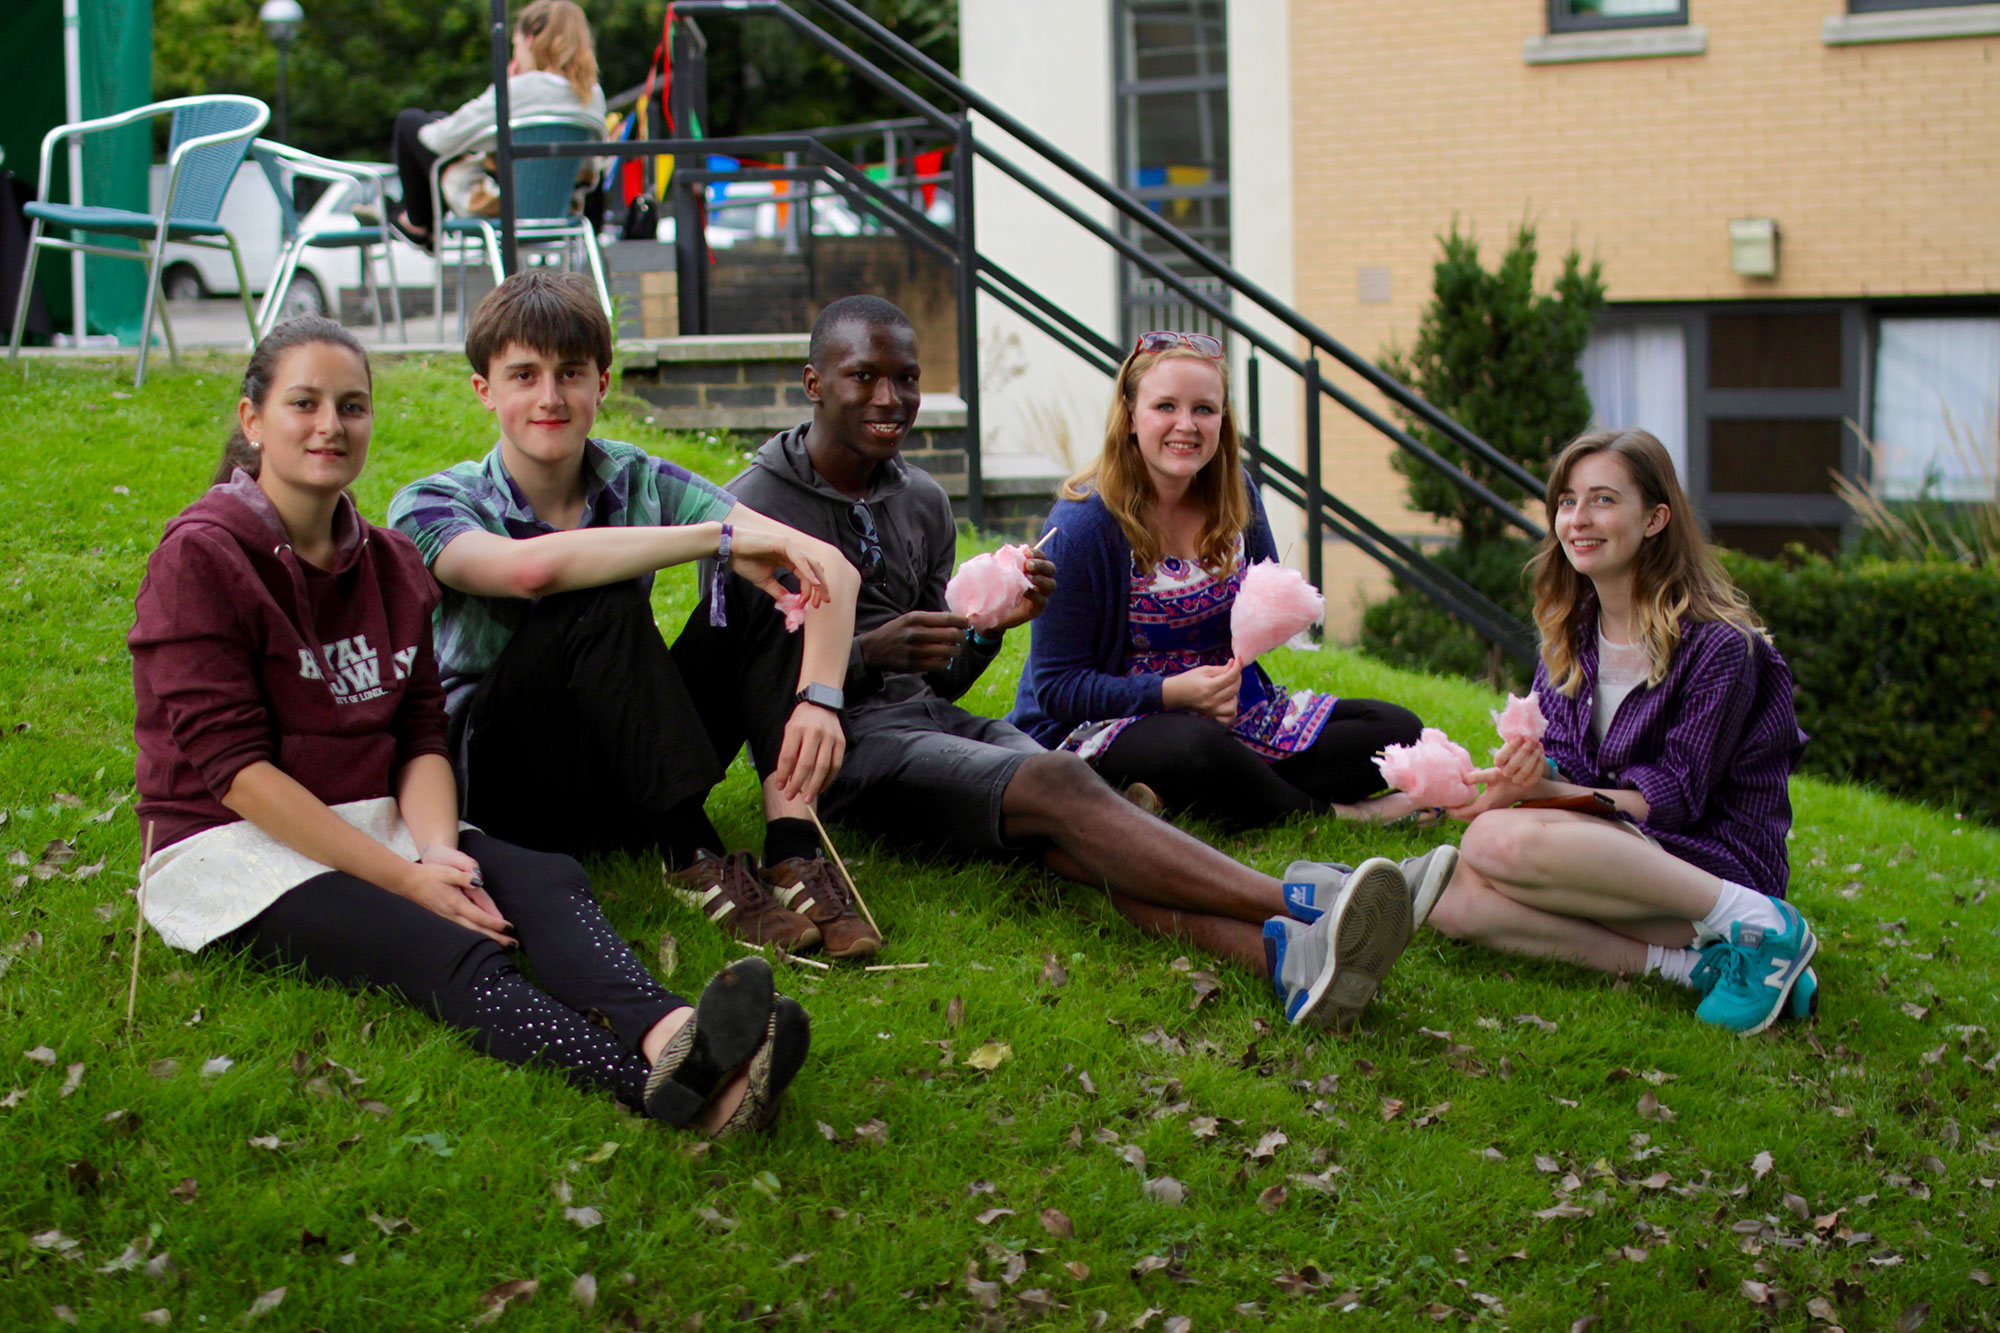 Students relaxing on a lawn at Kingswood